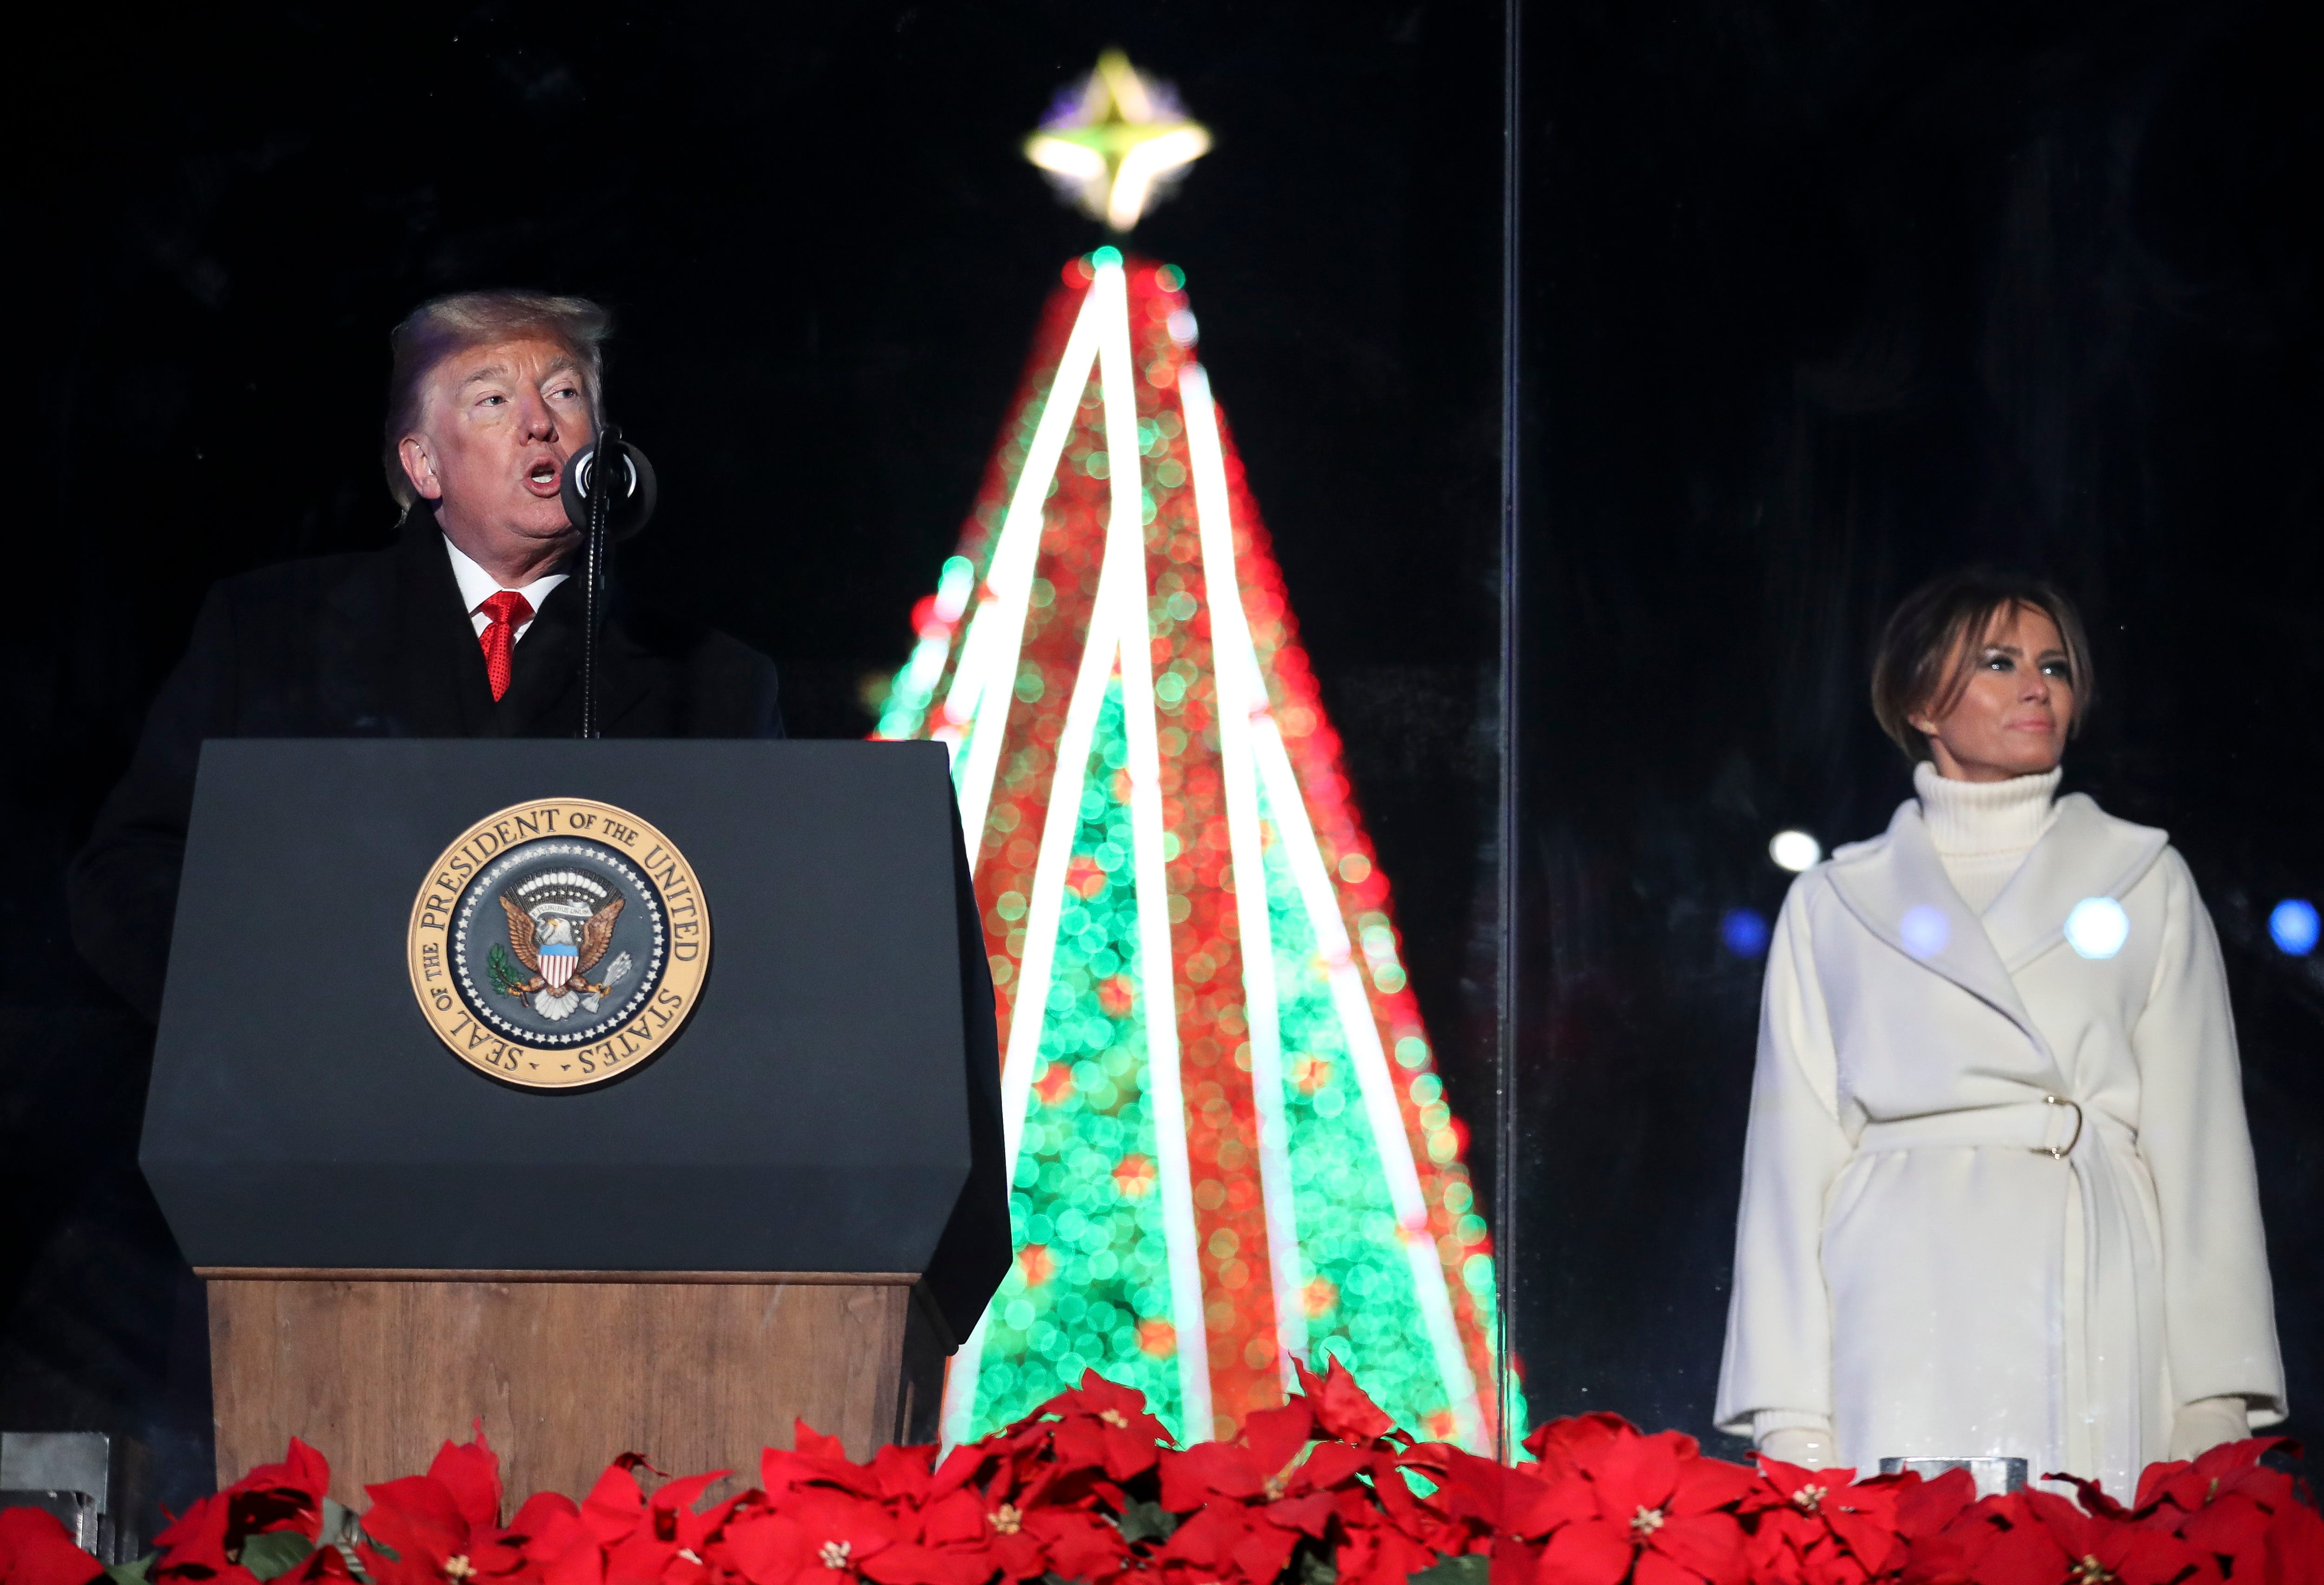 From Mueller to Kanye West, here&apos;s this year&apos;s White House Christmas poem